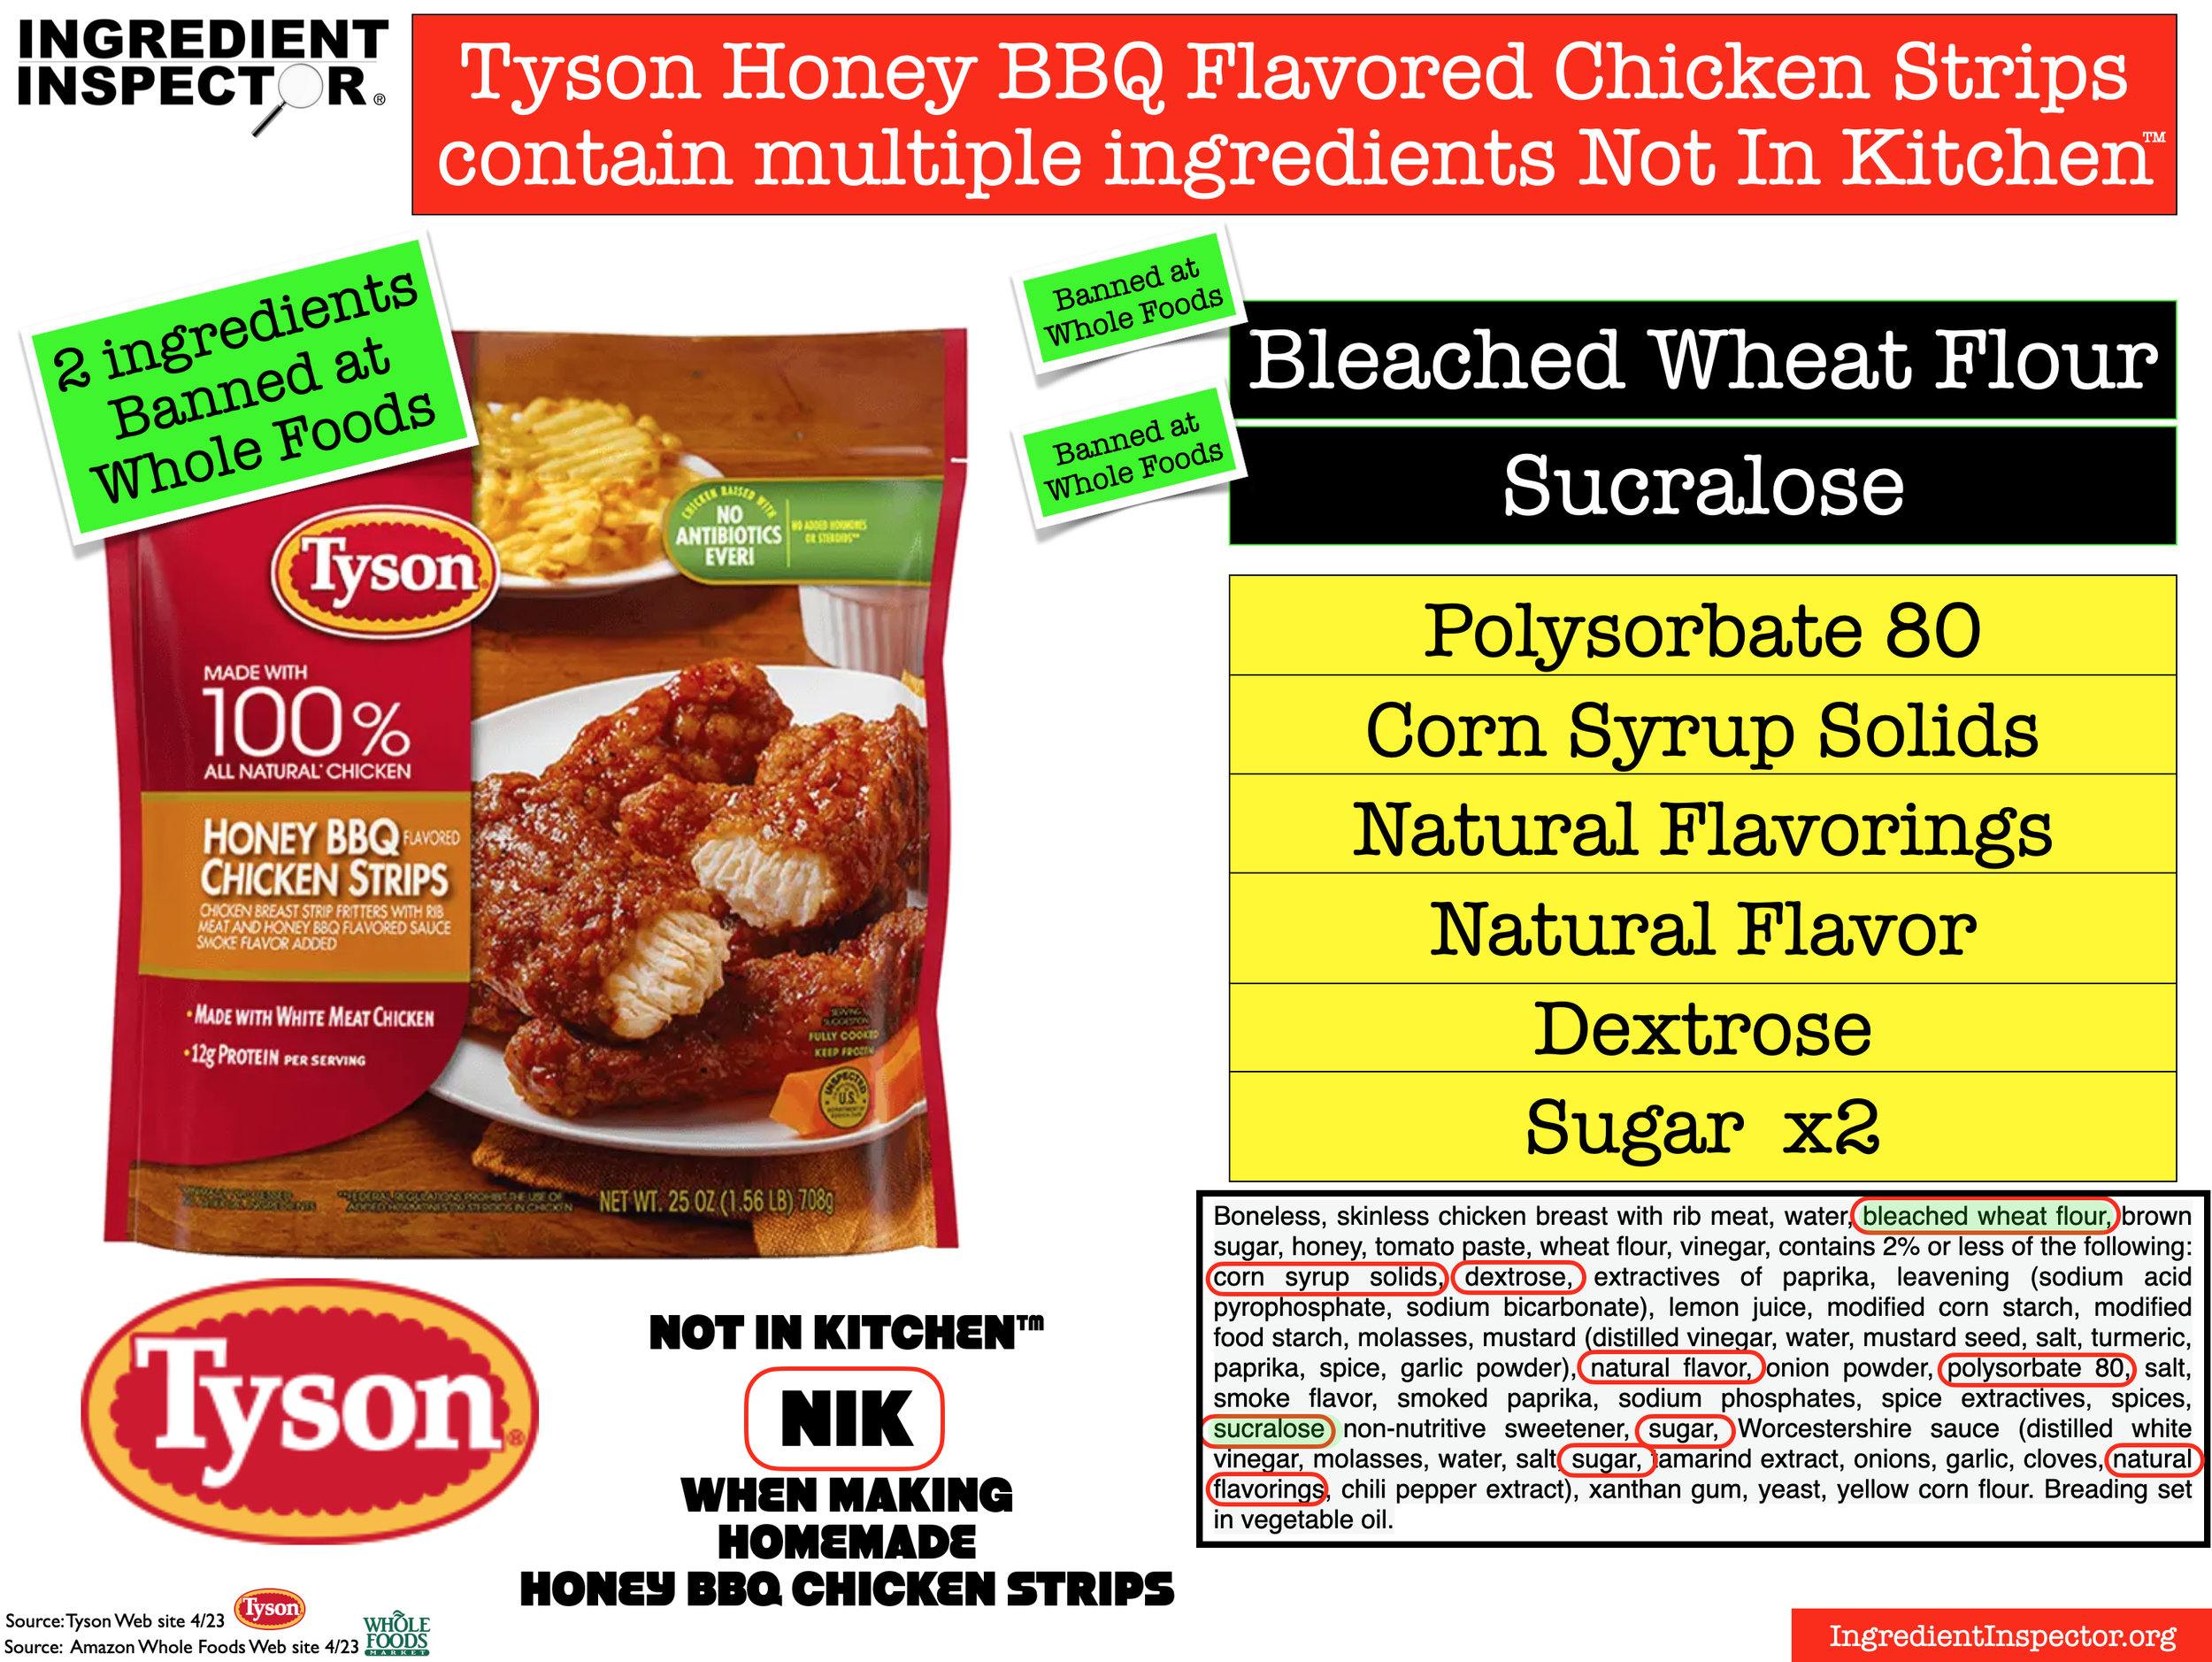 Whole Foods Sources Some of Its Chicken and Beef From Tyson and  Perdue-Owned Brands